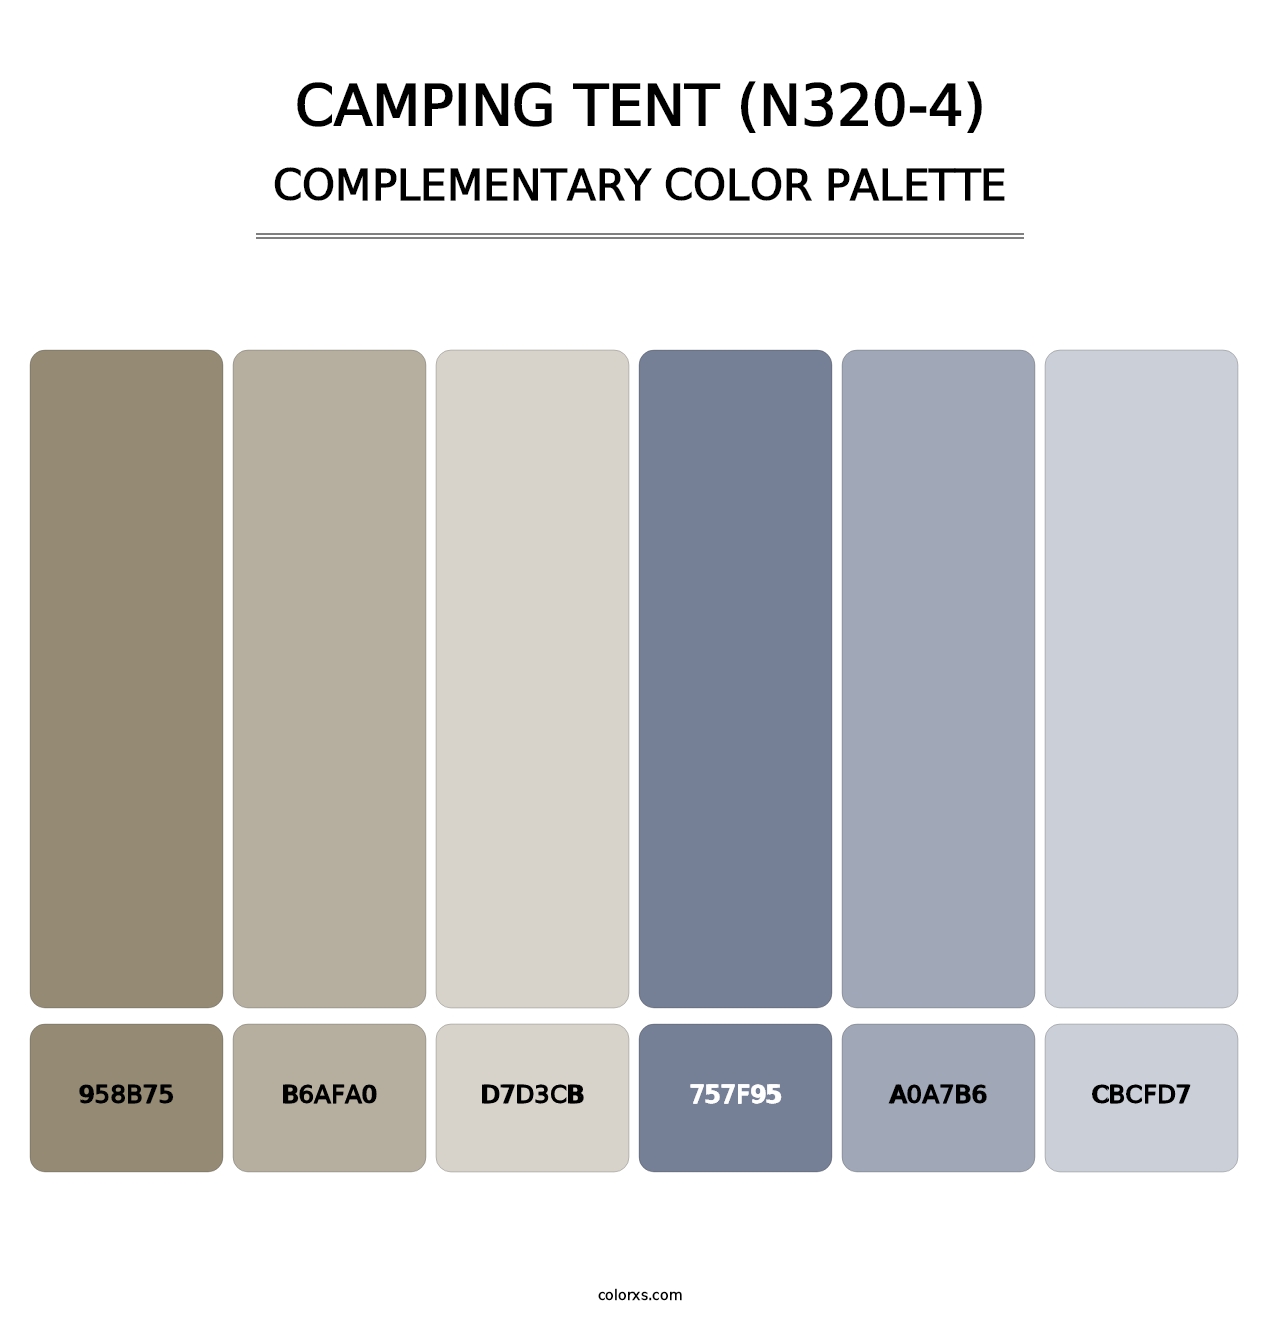 Camping Tent (N320-4) - Complementary Color Palette